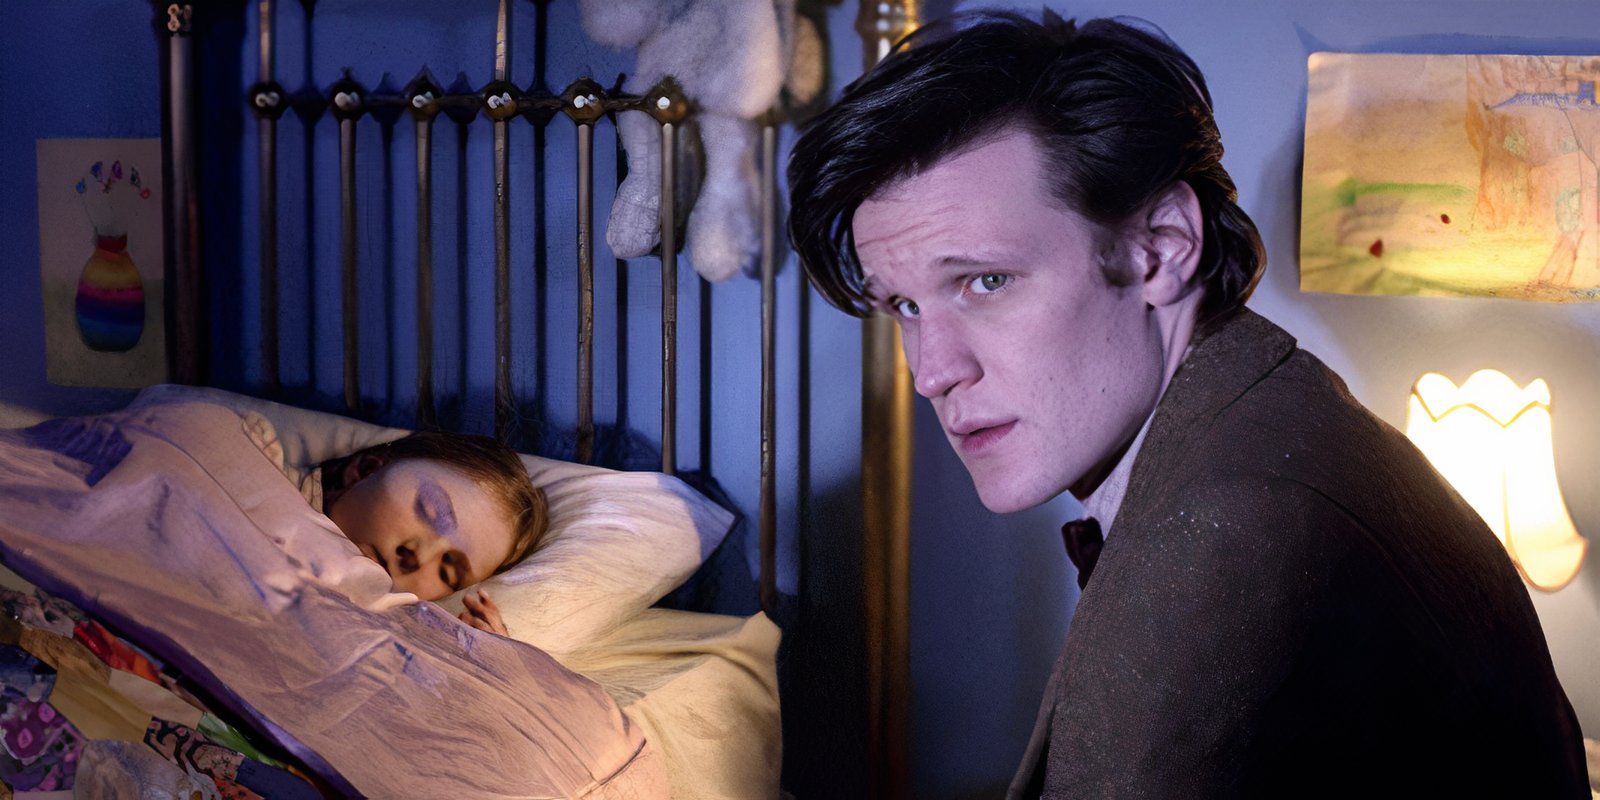 11th Doctor next to sleeping child Amy Pond in 'The Big Bang' from 'Doctor Who'